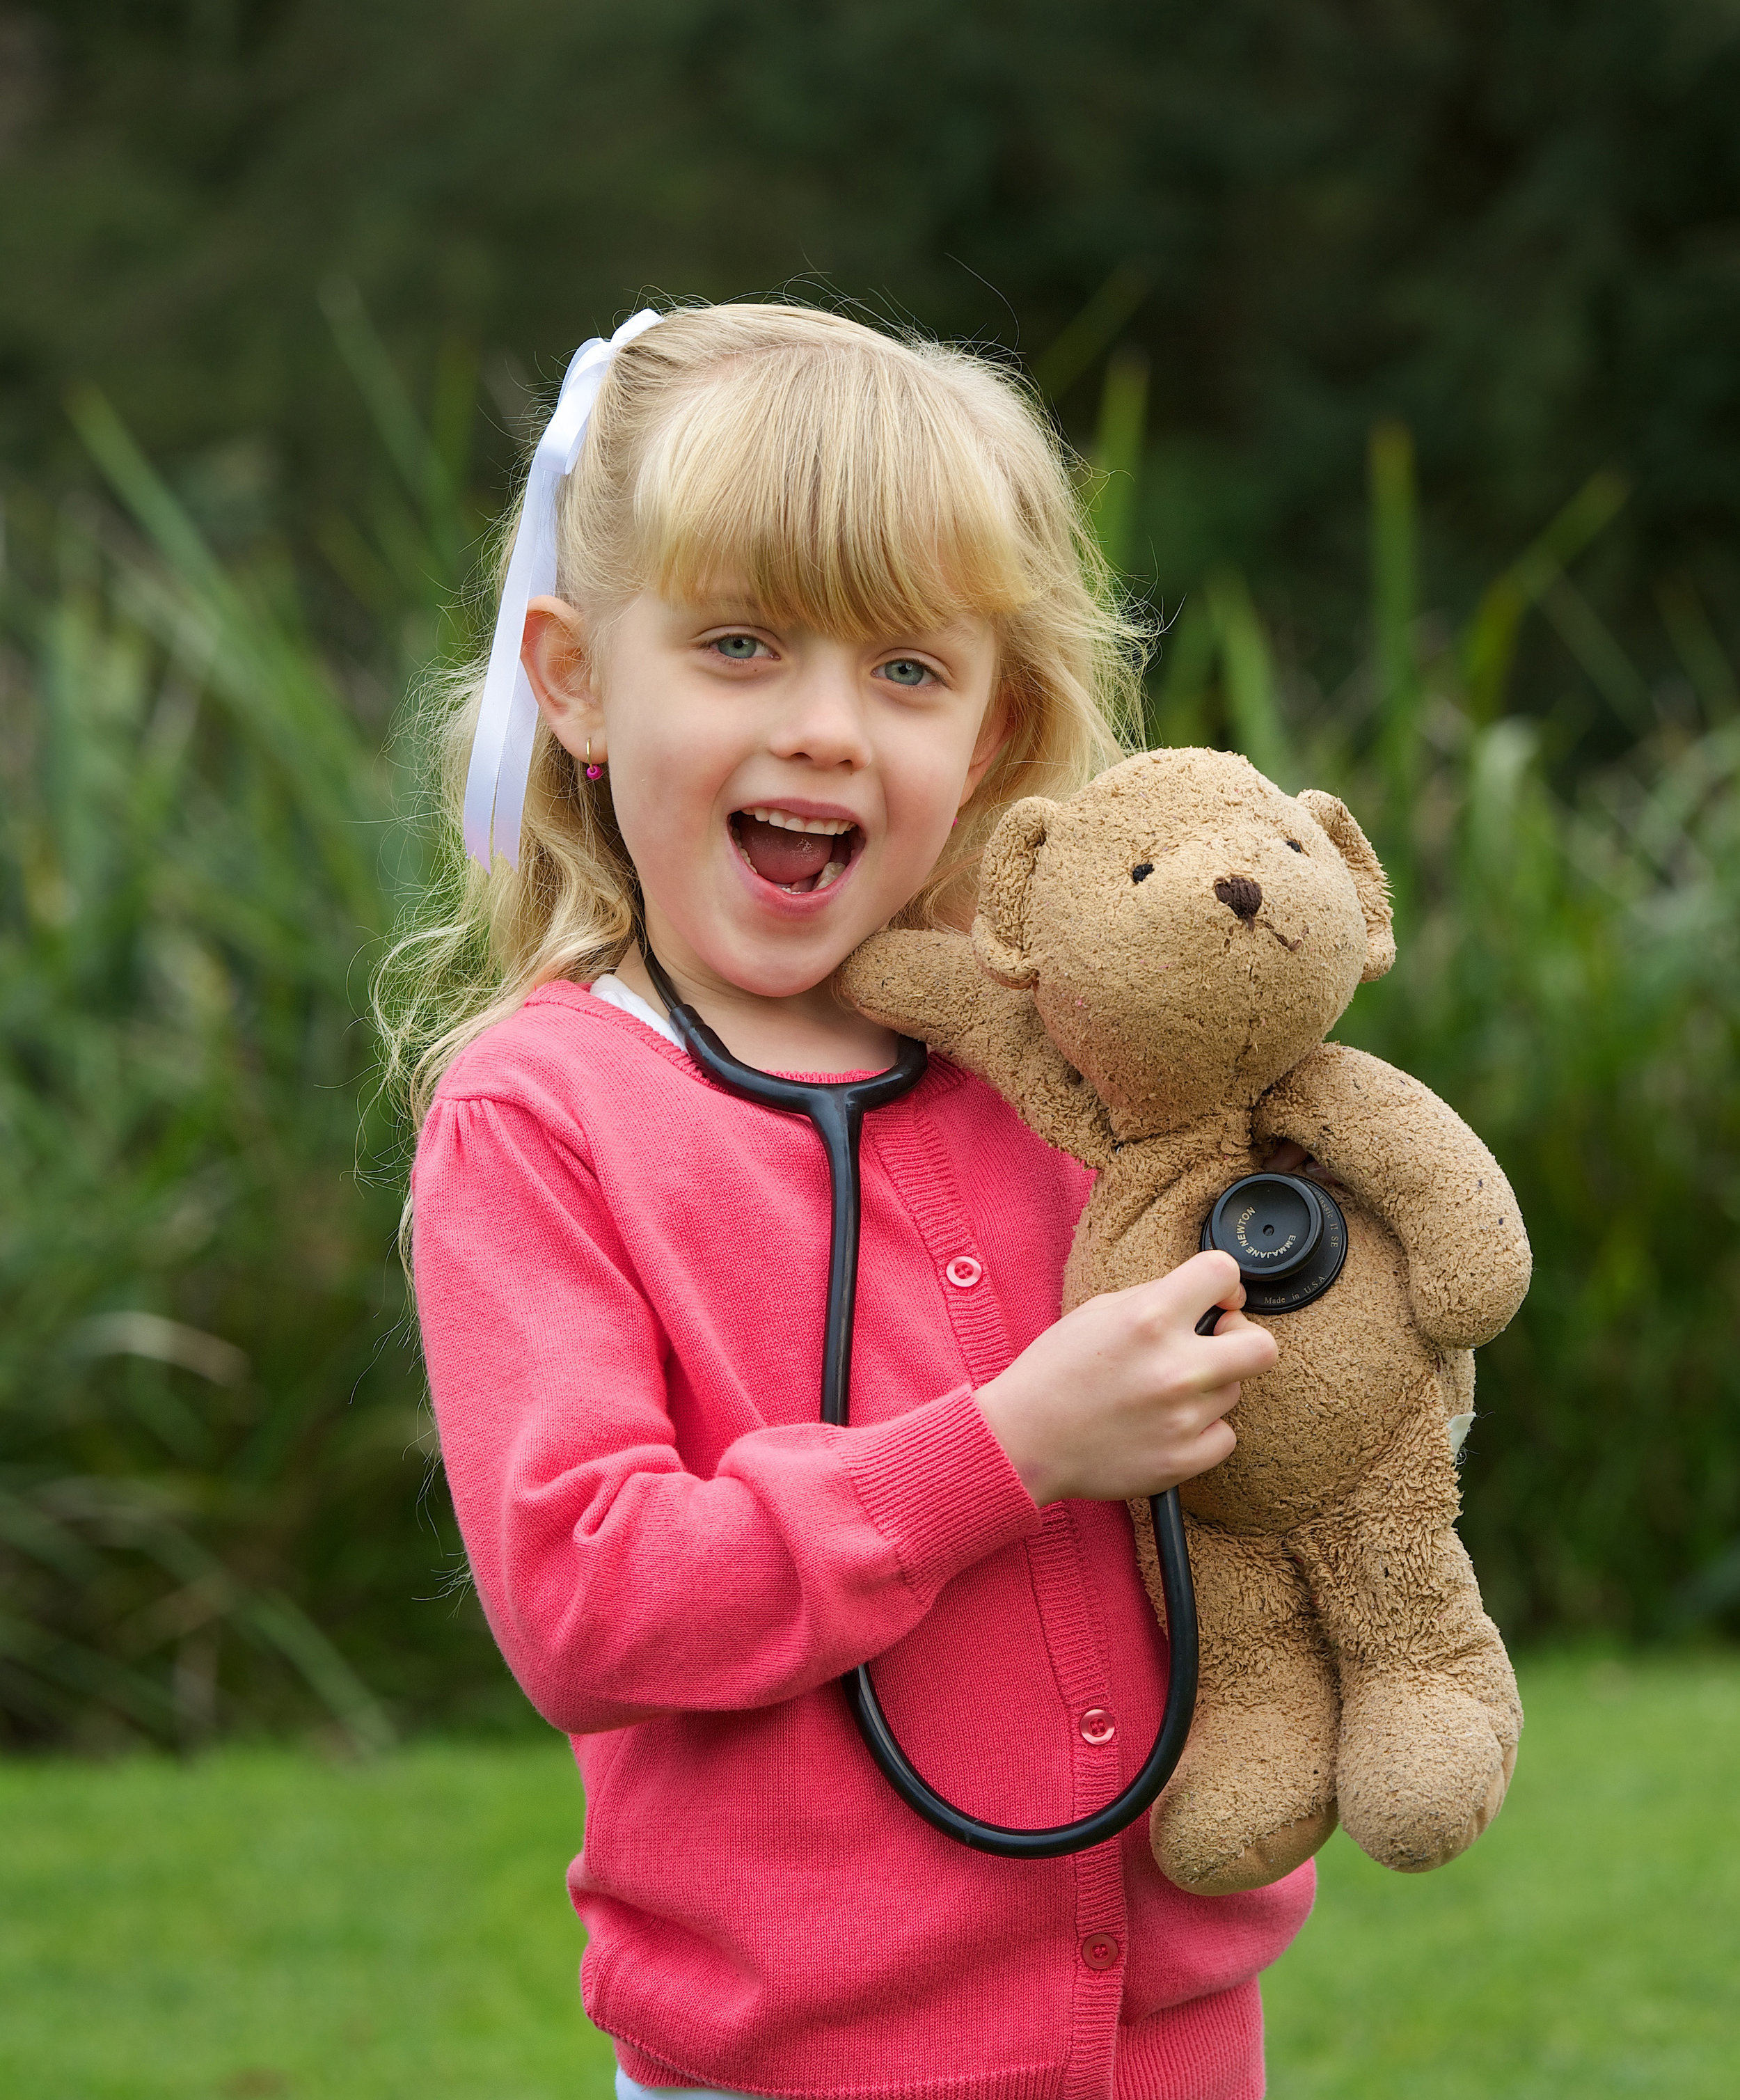 CHP_Export_92078535_Lily Inglis 6 visited Healesville Sanctuary with Milo her teddy who received.jpg